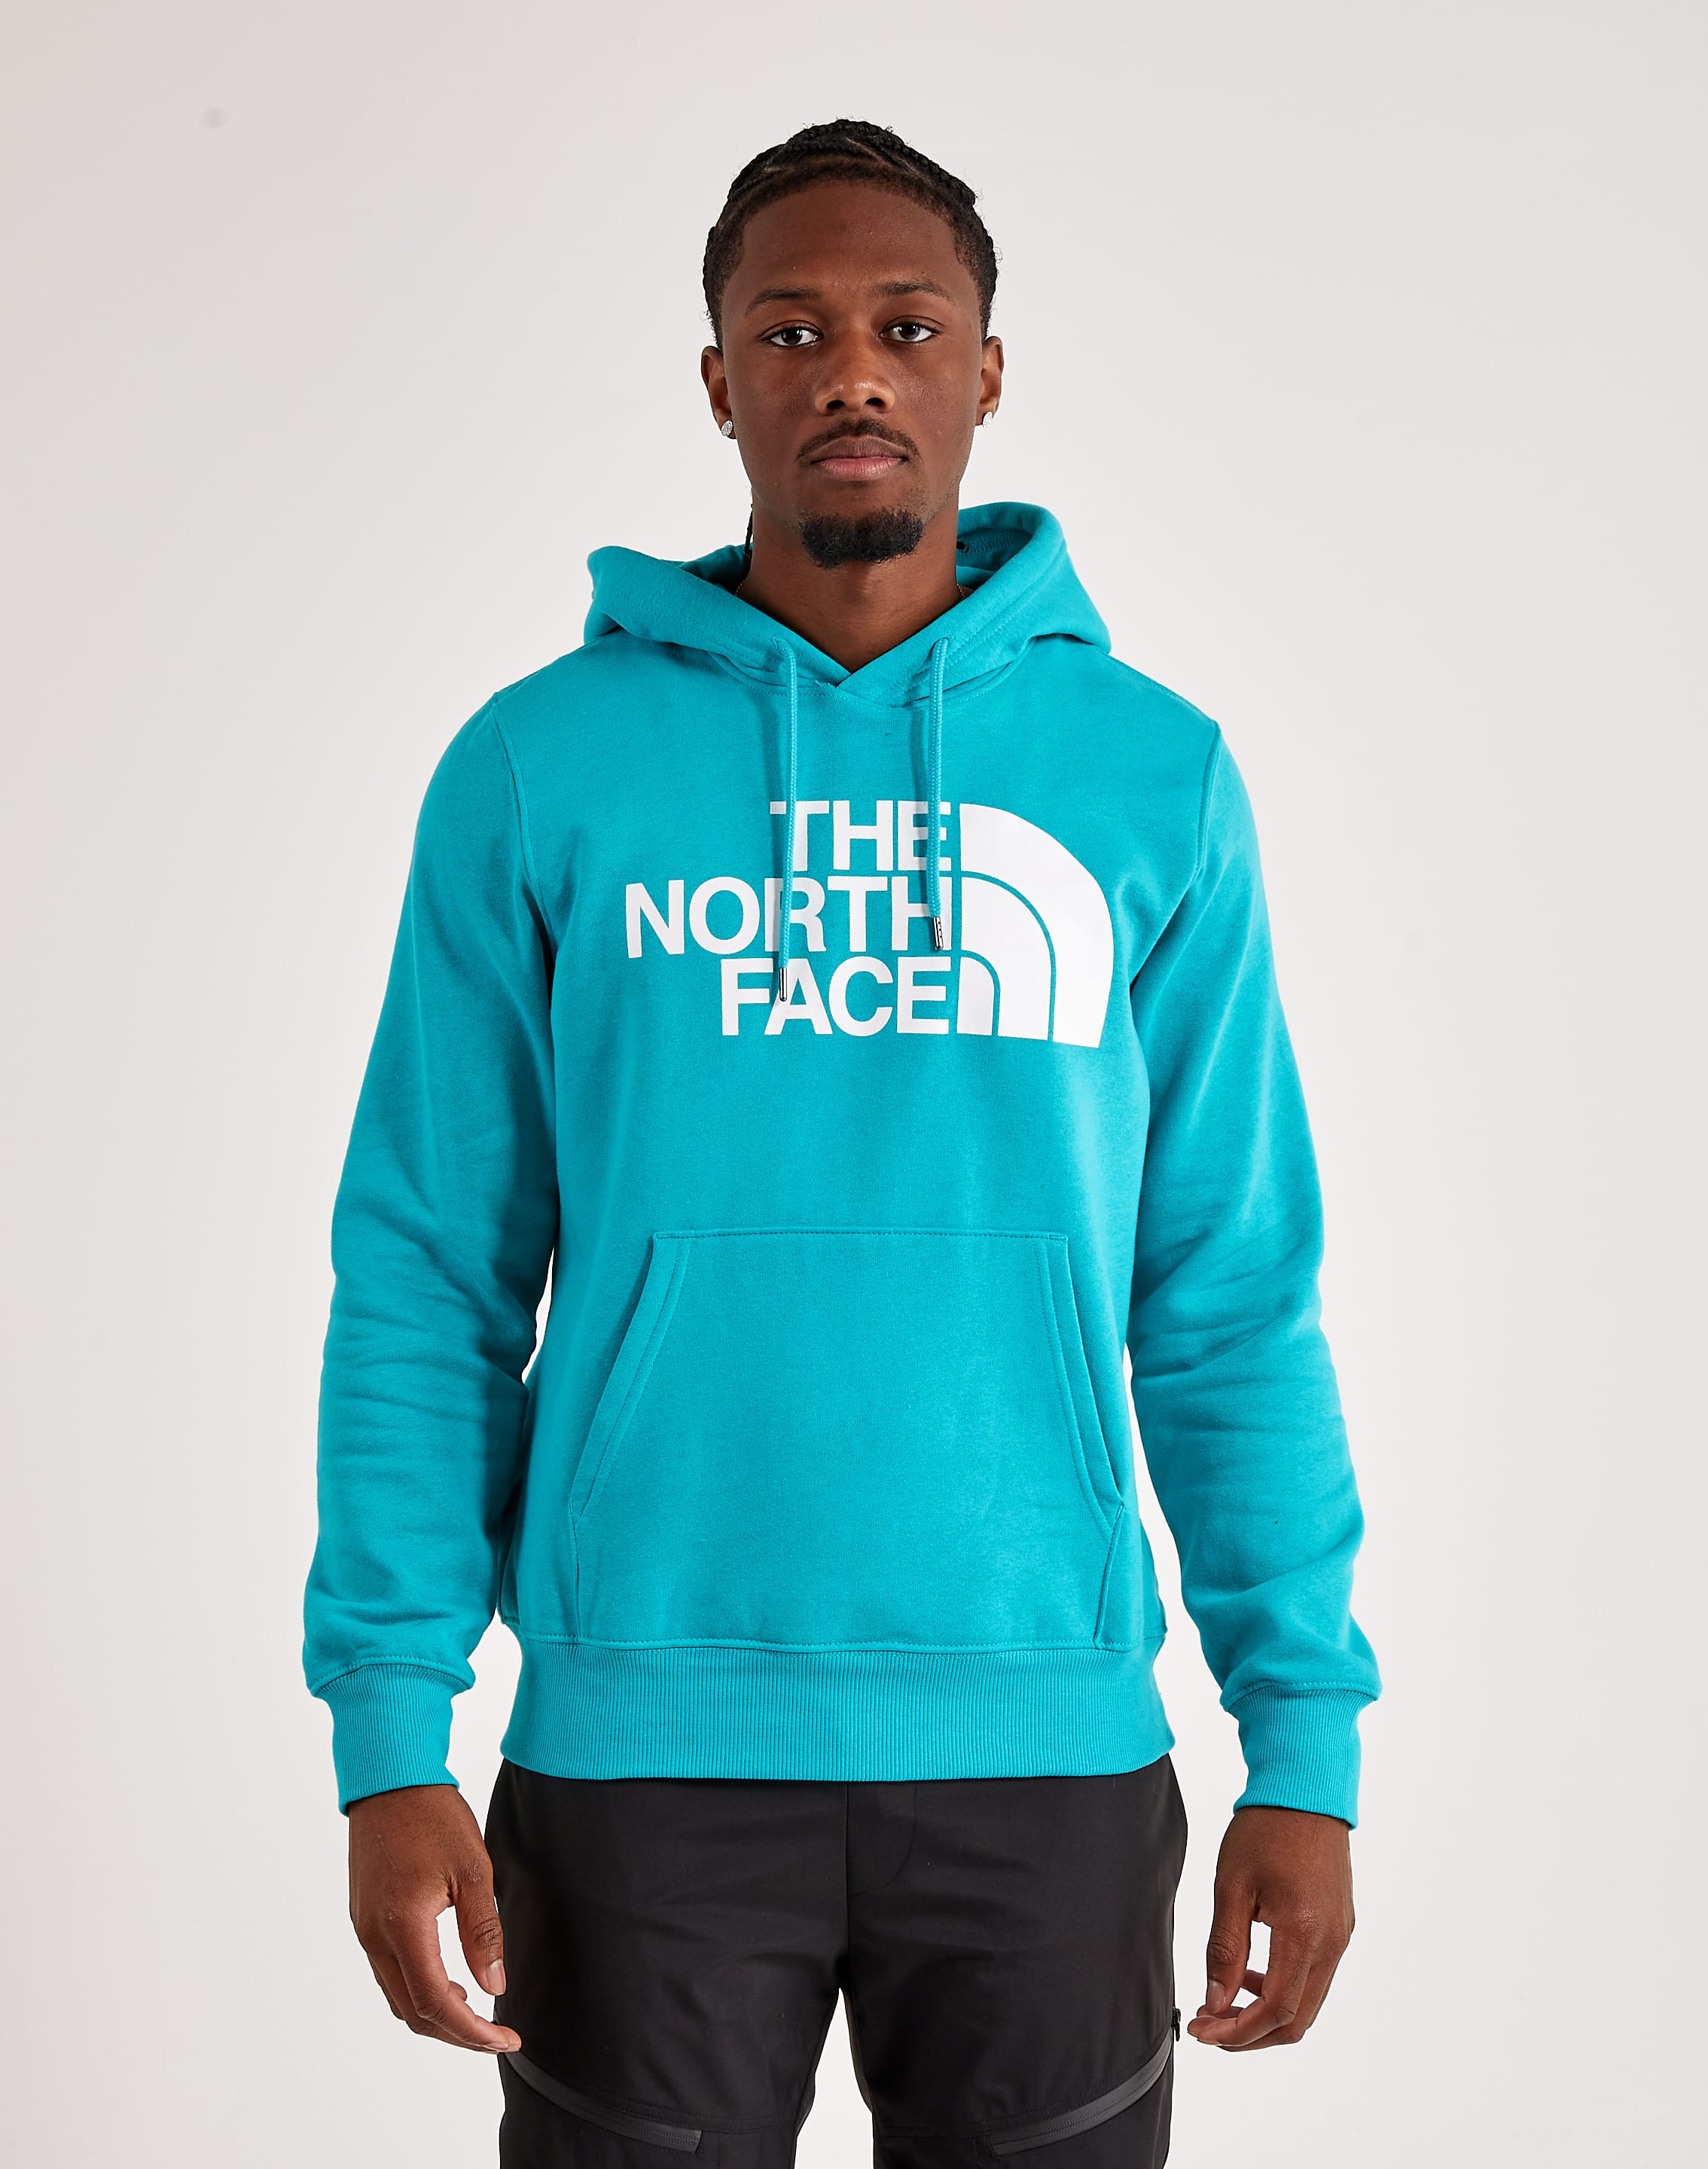 The North Face Half Dome Hoodie – DTLR